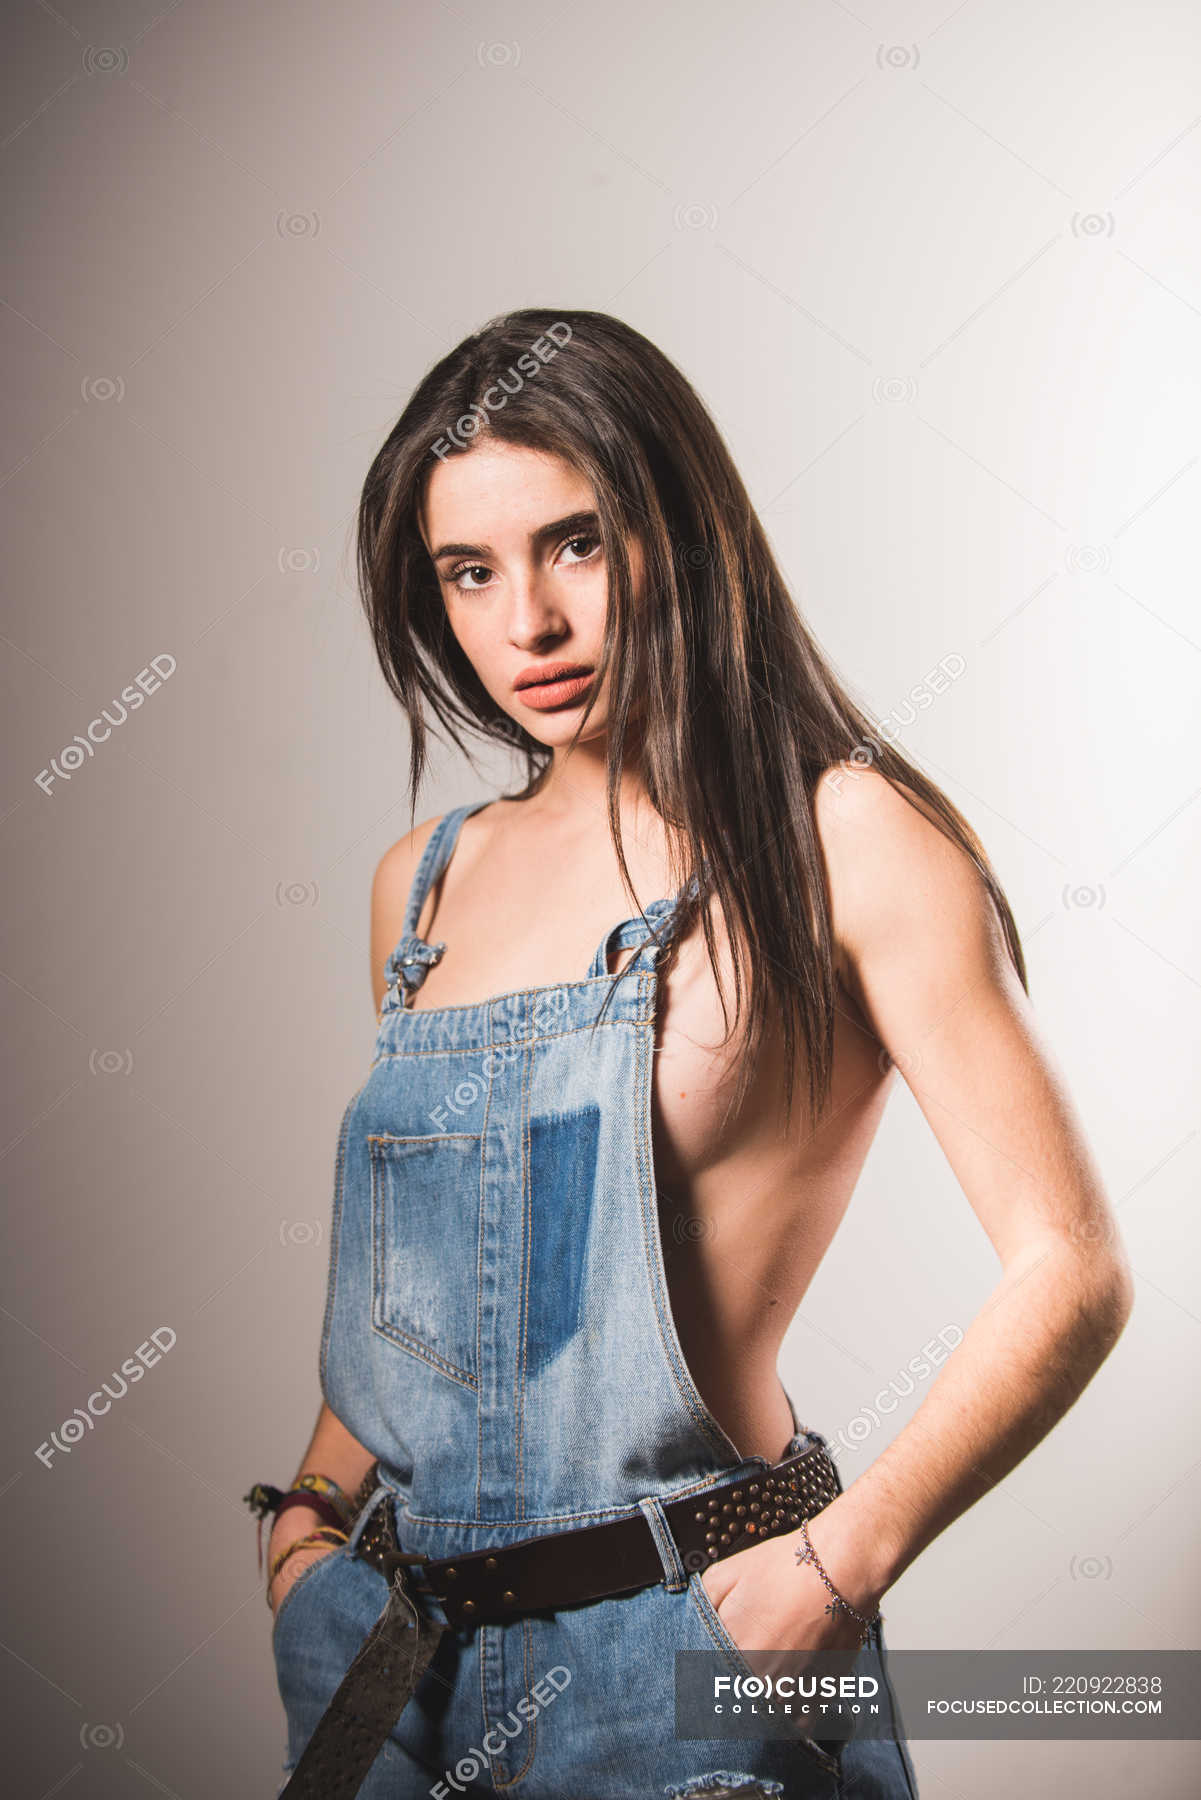 bro pålægge evig Sexy girl in denim jumpsuit over naked body posing on grey background —  fashion, romantic - Stock Photo | #220922838